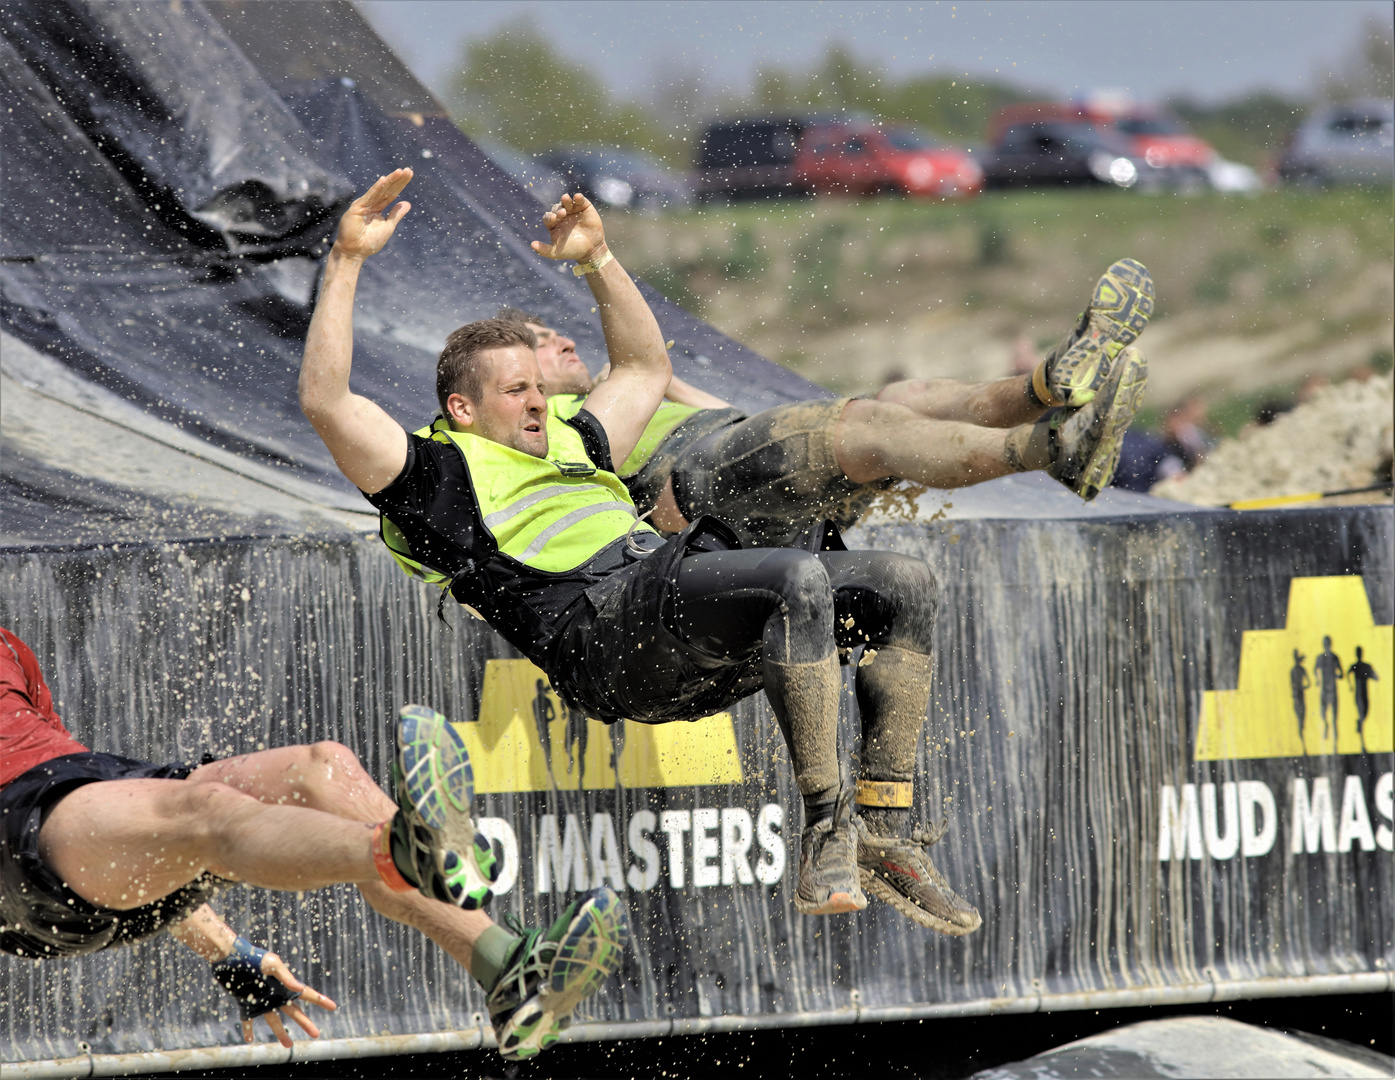 "Mud Masters" in Weeze 2017 (3)